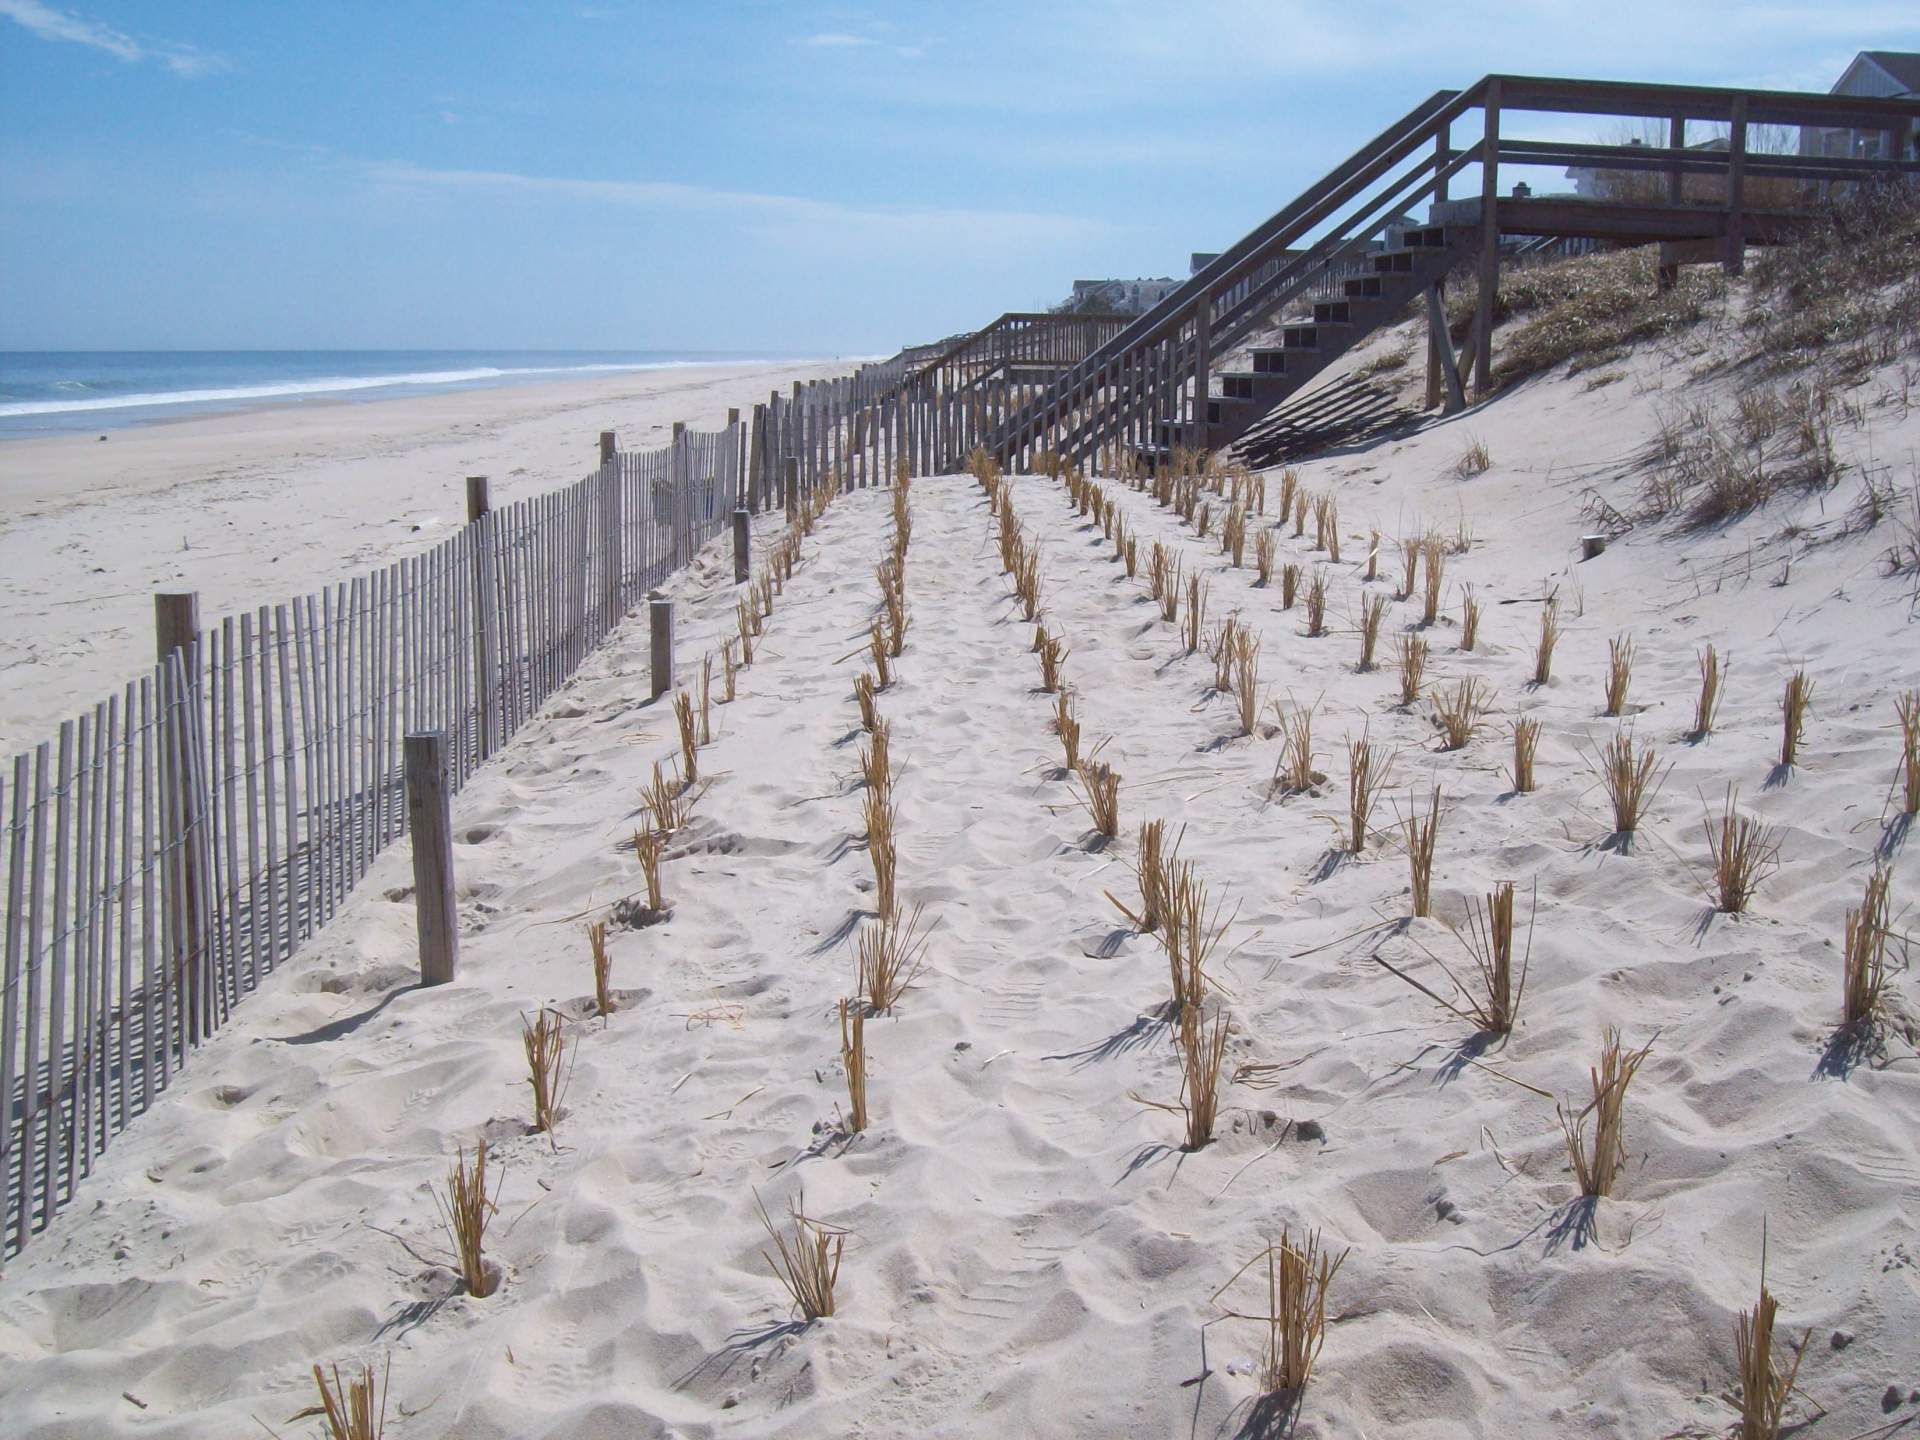 Culms of beach grass planted in winter